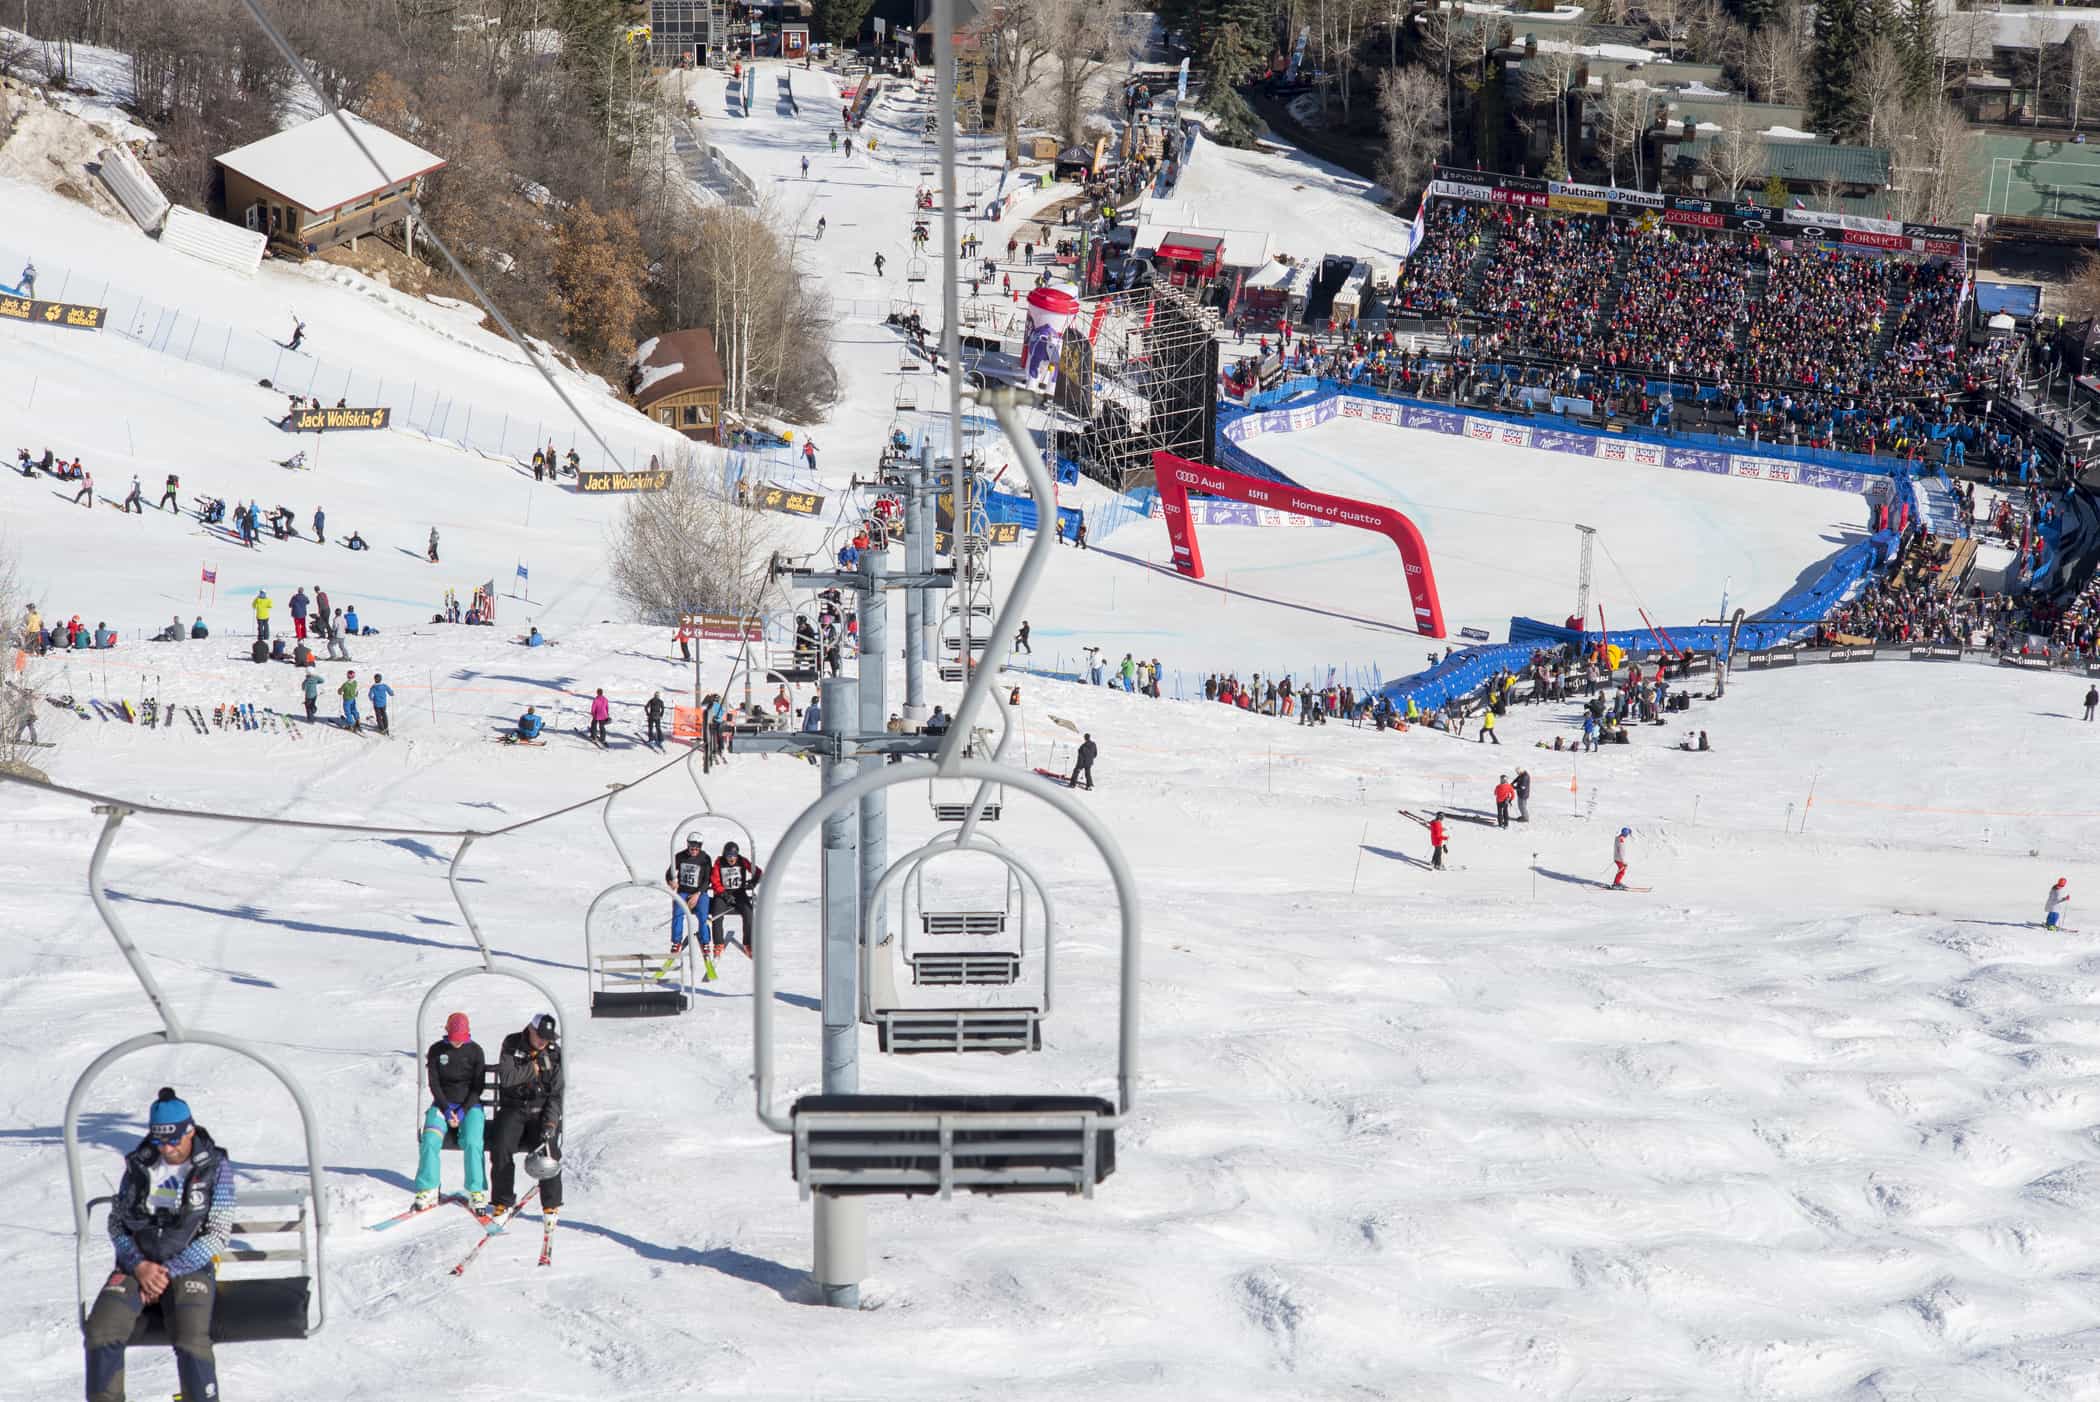 Aspen Snowmass, CO, Announces Audi FIS Ski World Cup Schedule and Events Return to Americas Downhill